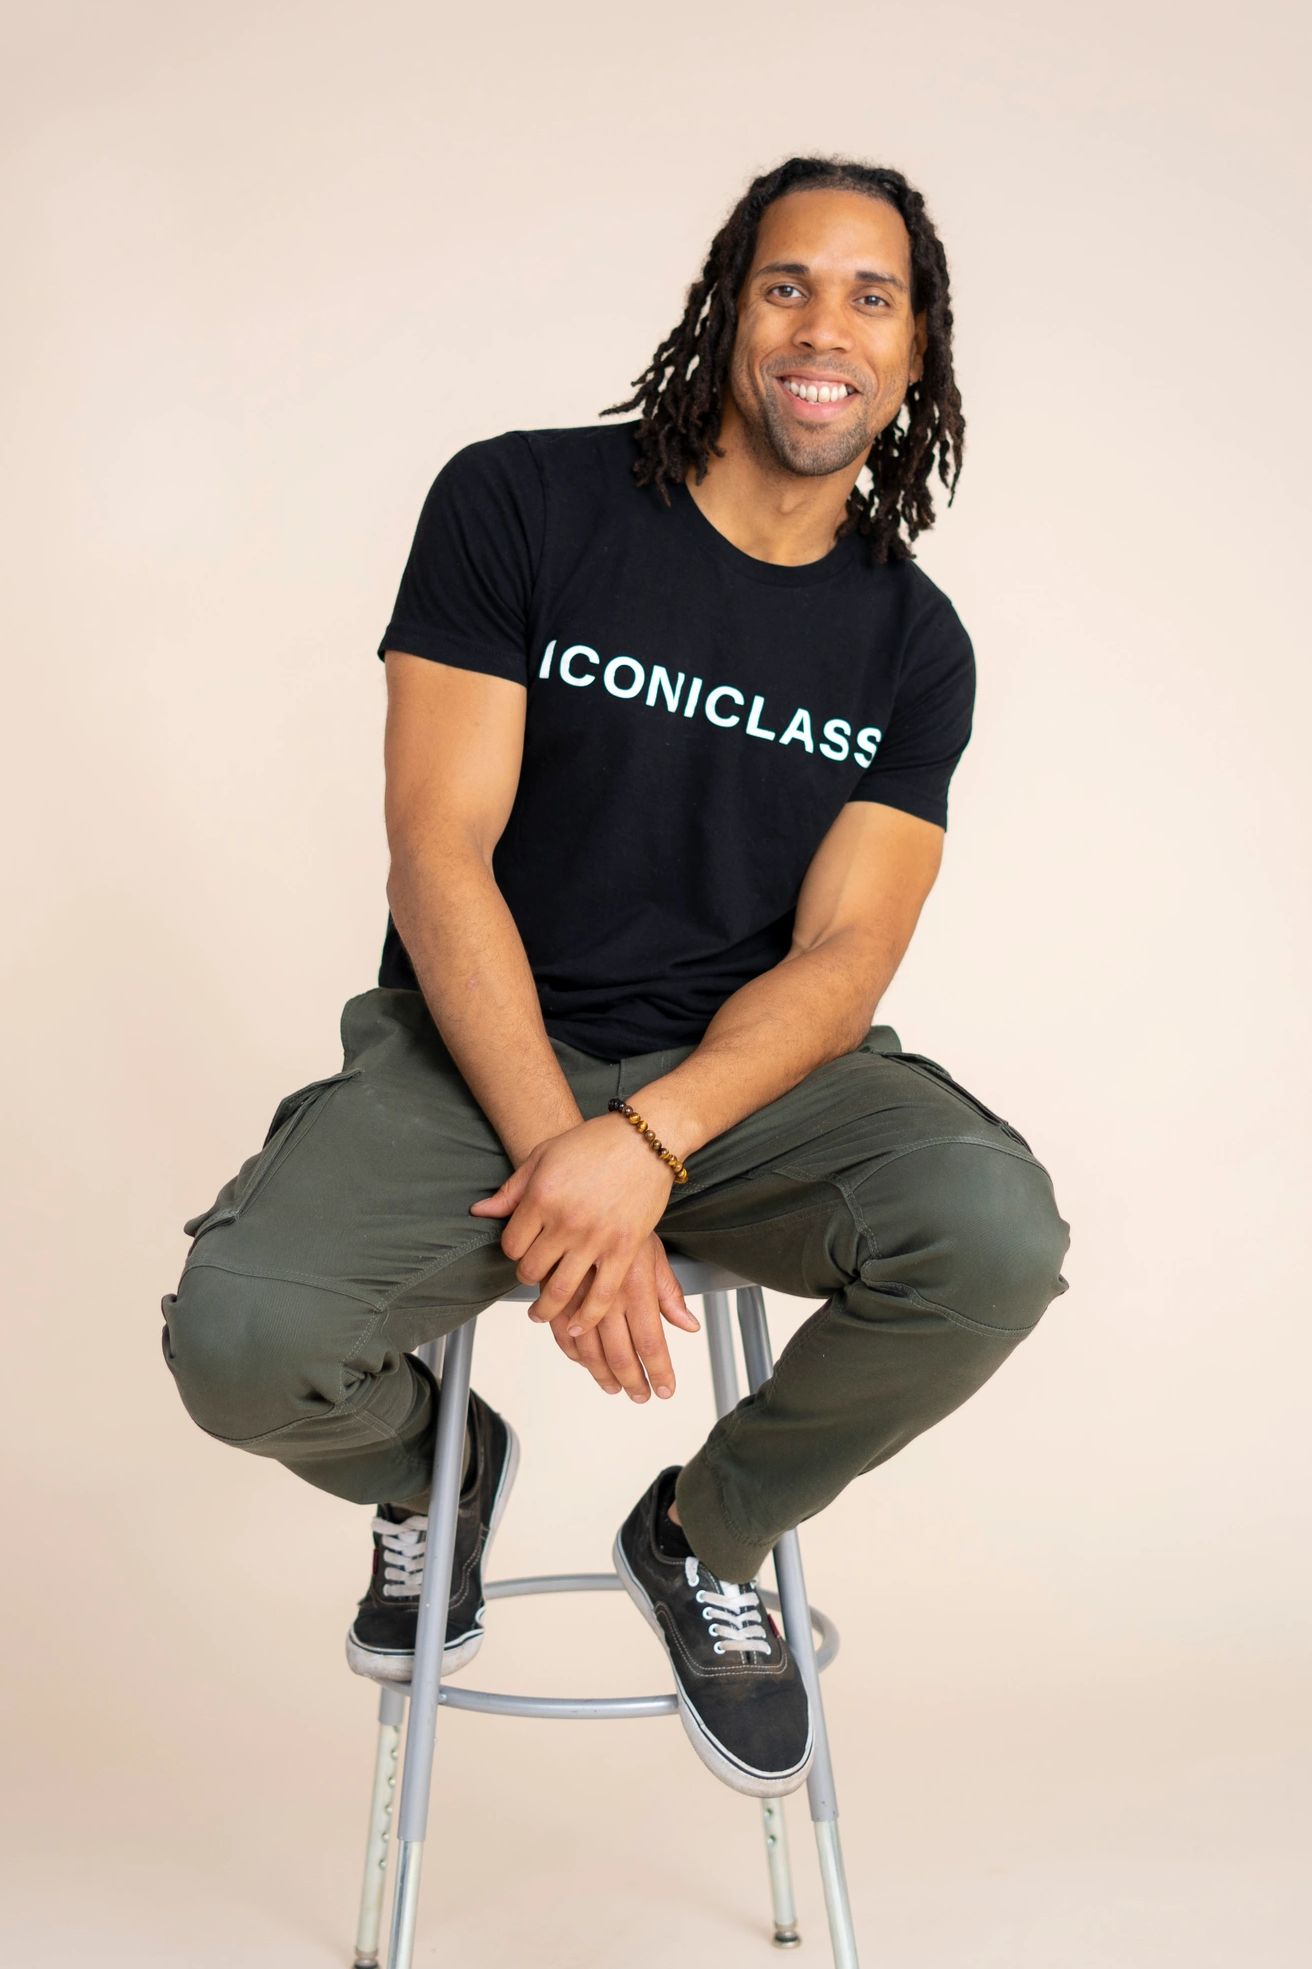 The founder smiling while seated on a stool wearing an "ICONICLASS" branded shirt.